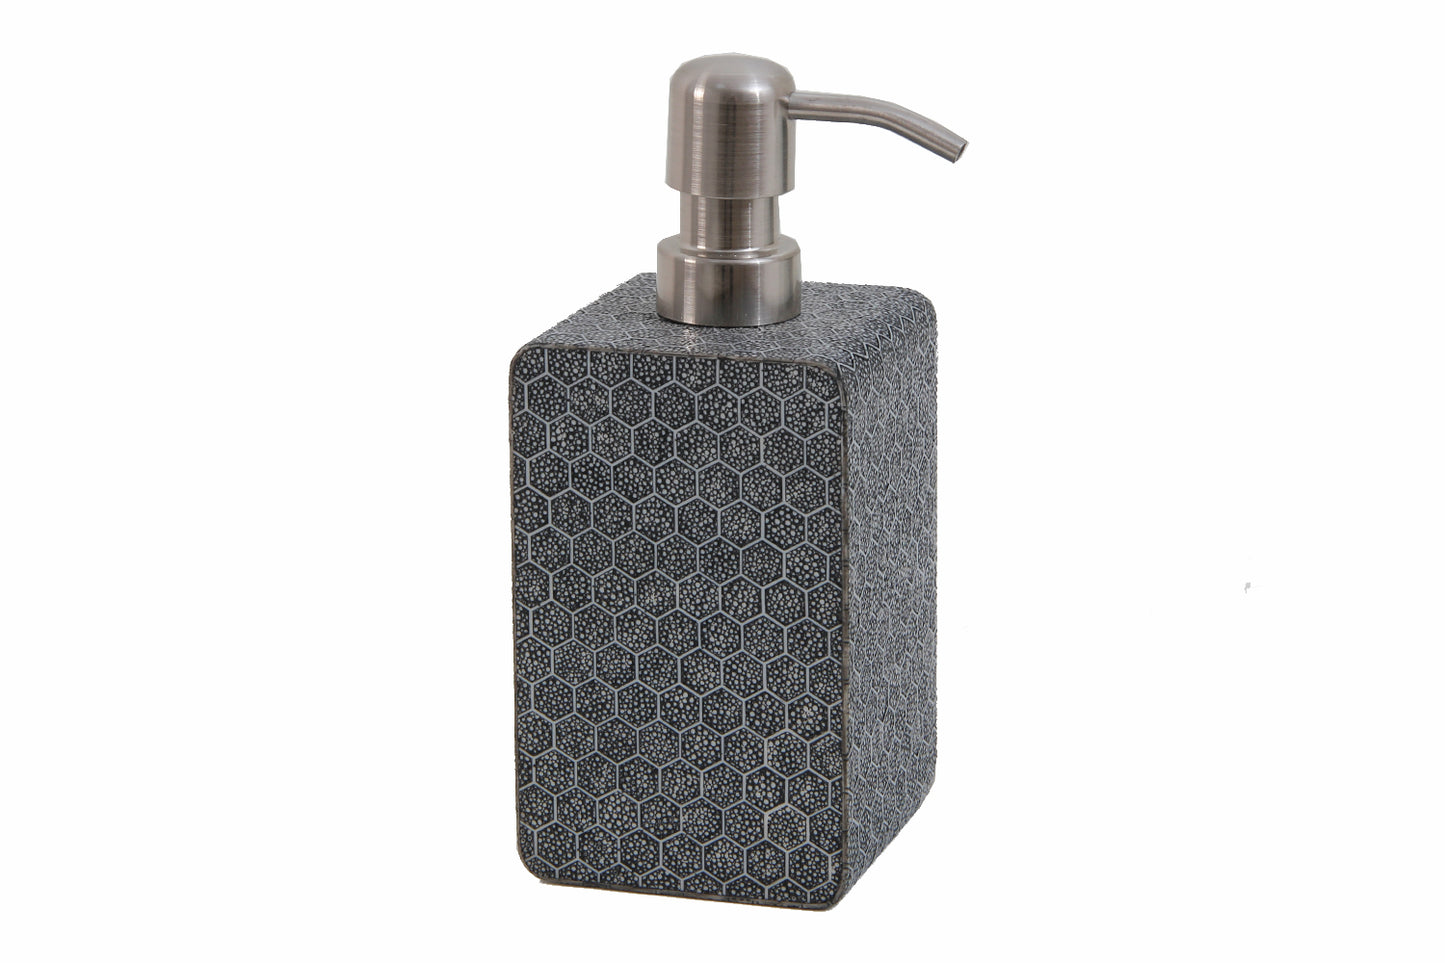 The Hex Soap Pump in Charcoal Shagreen